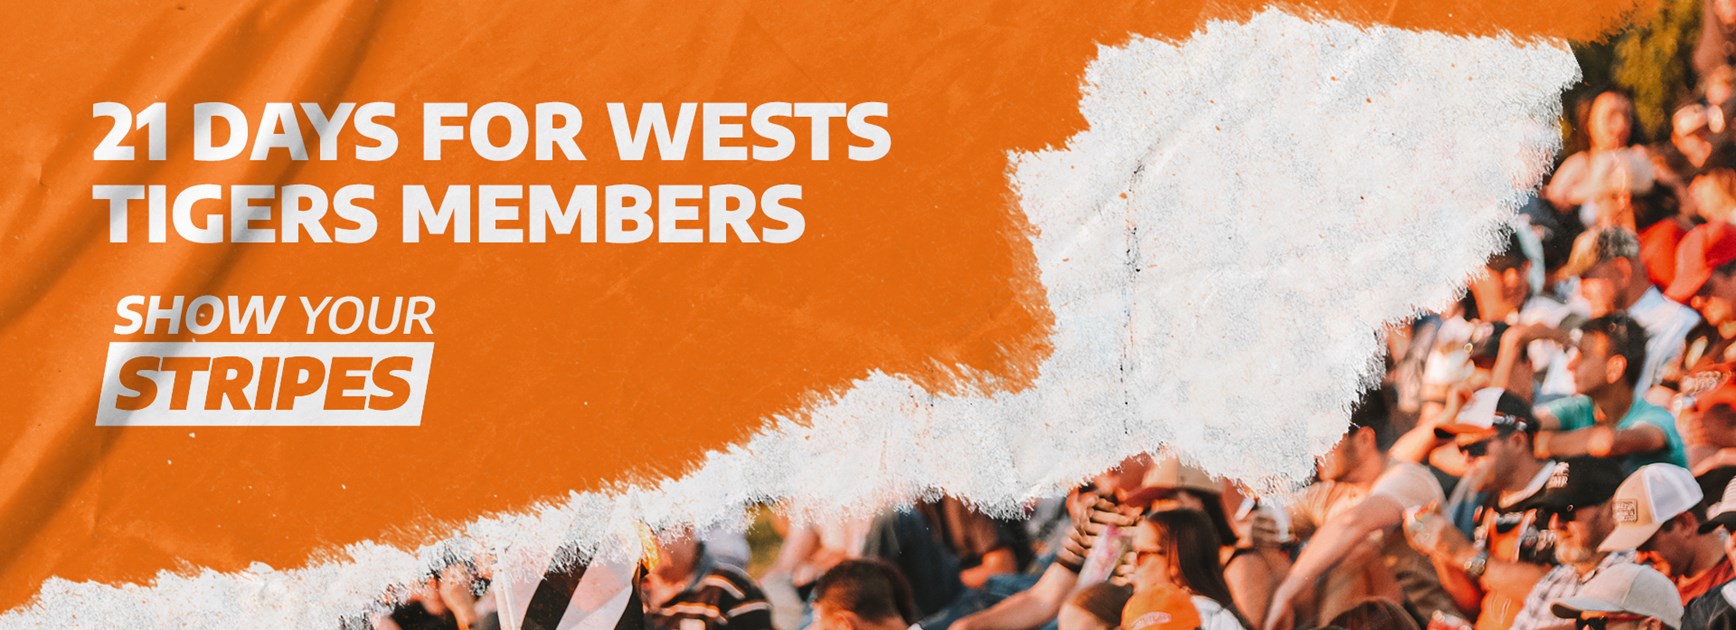 Wests Tigers reward Members with 21-day prize giveaway